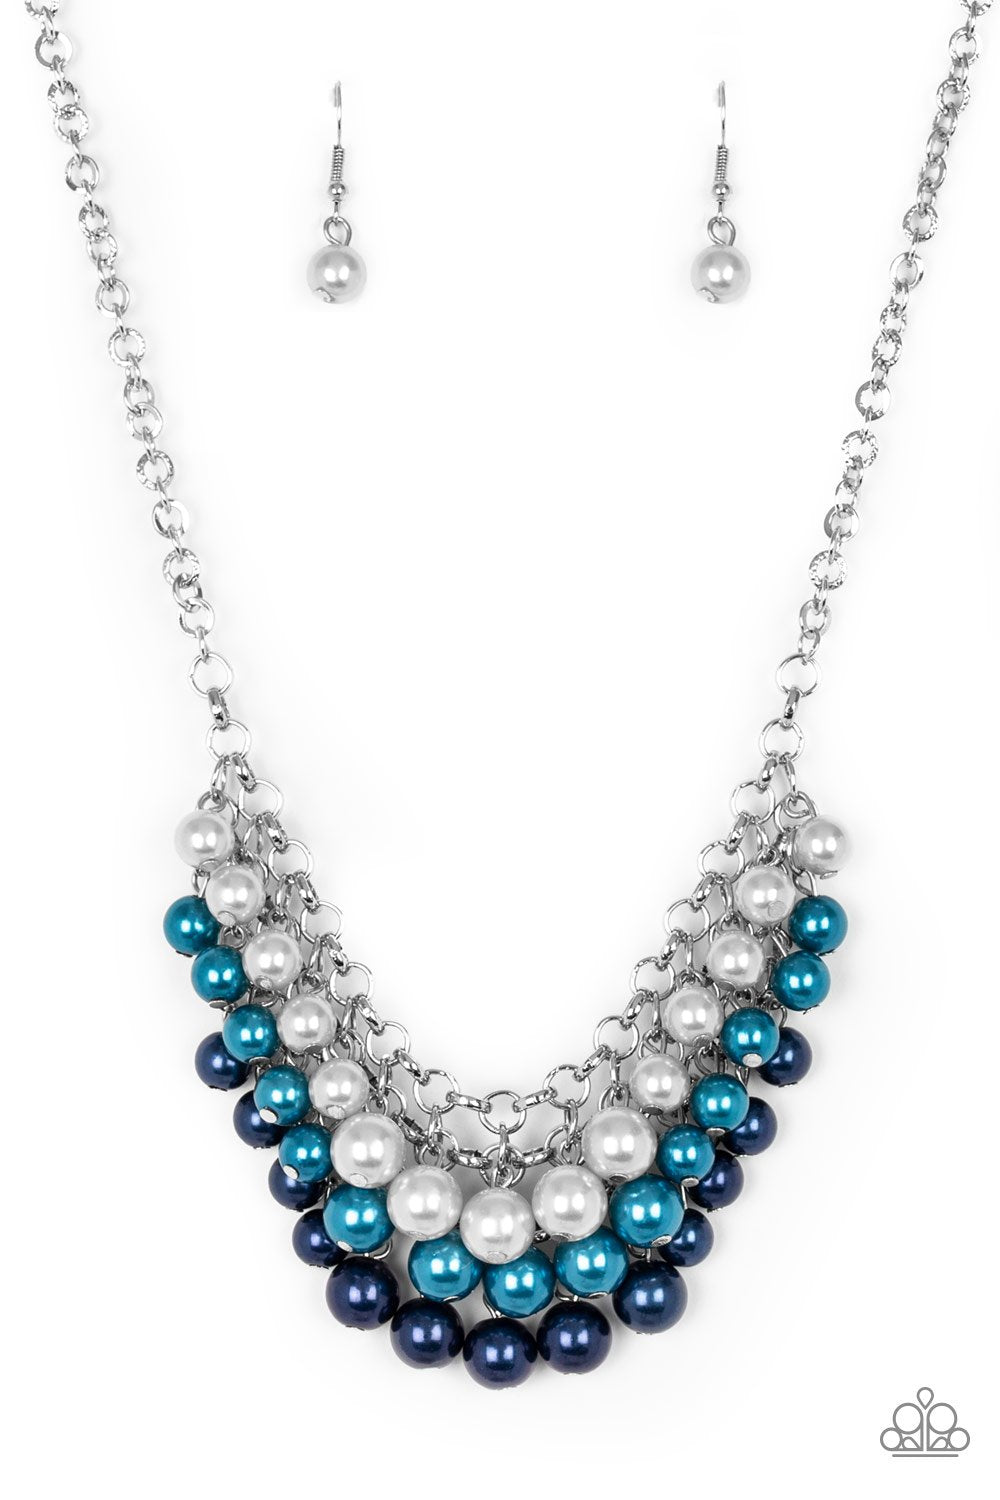 Paparazzi Necklace ~ Run For The HEELS! - Blue